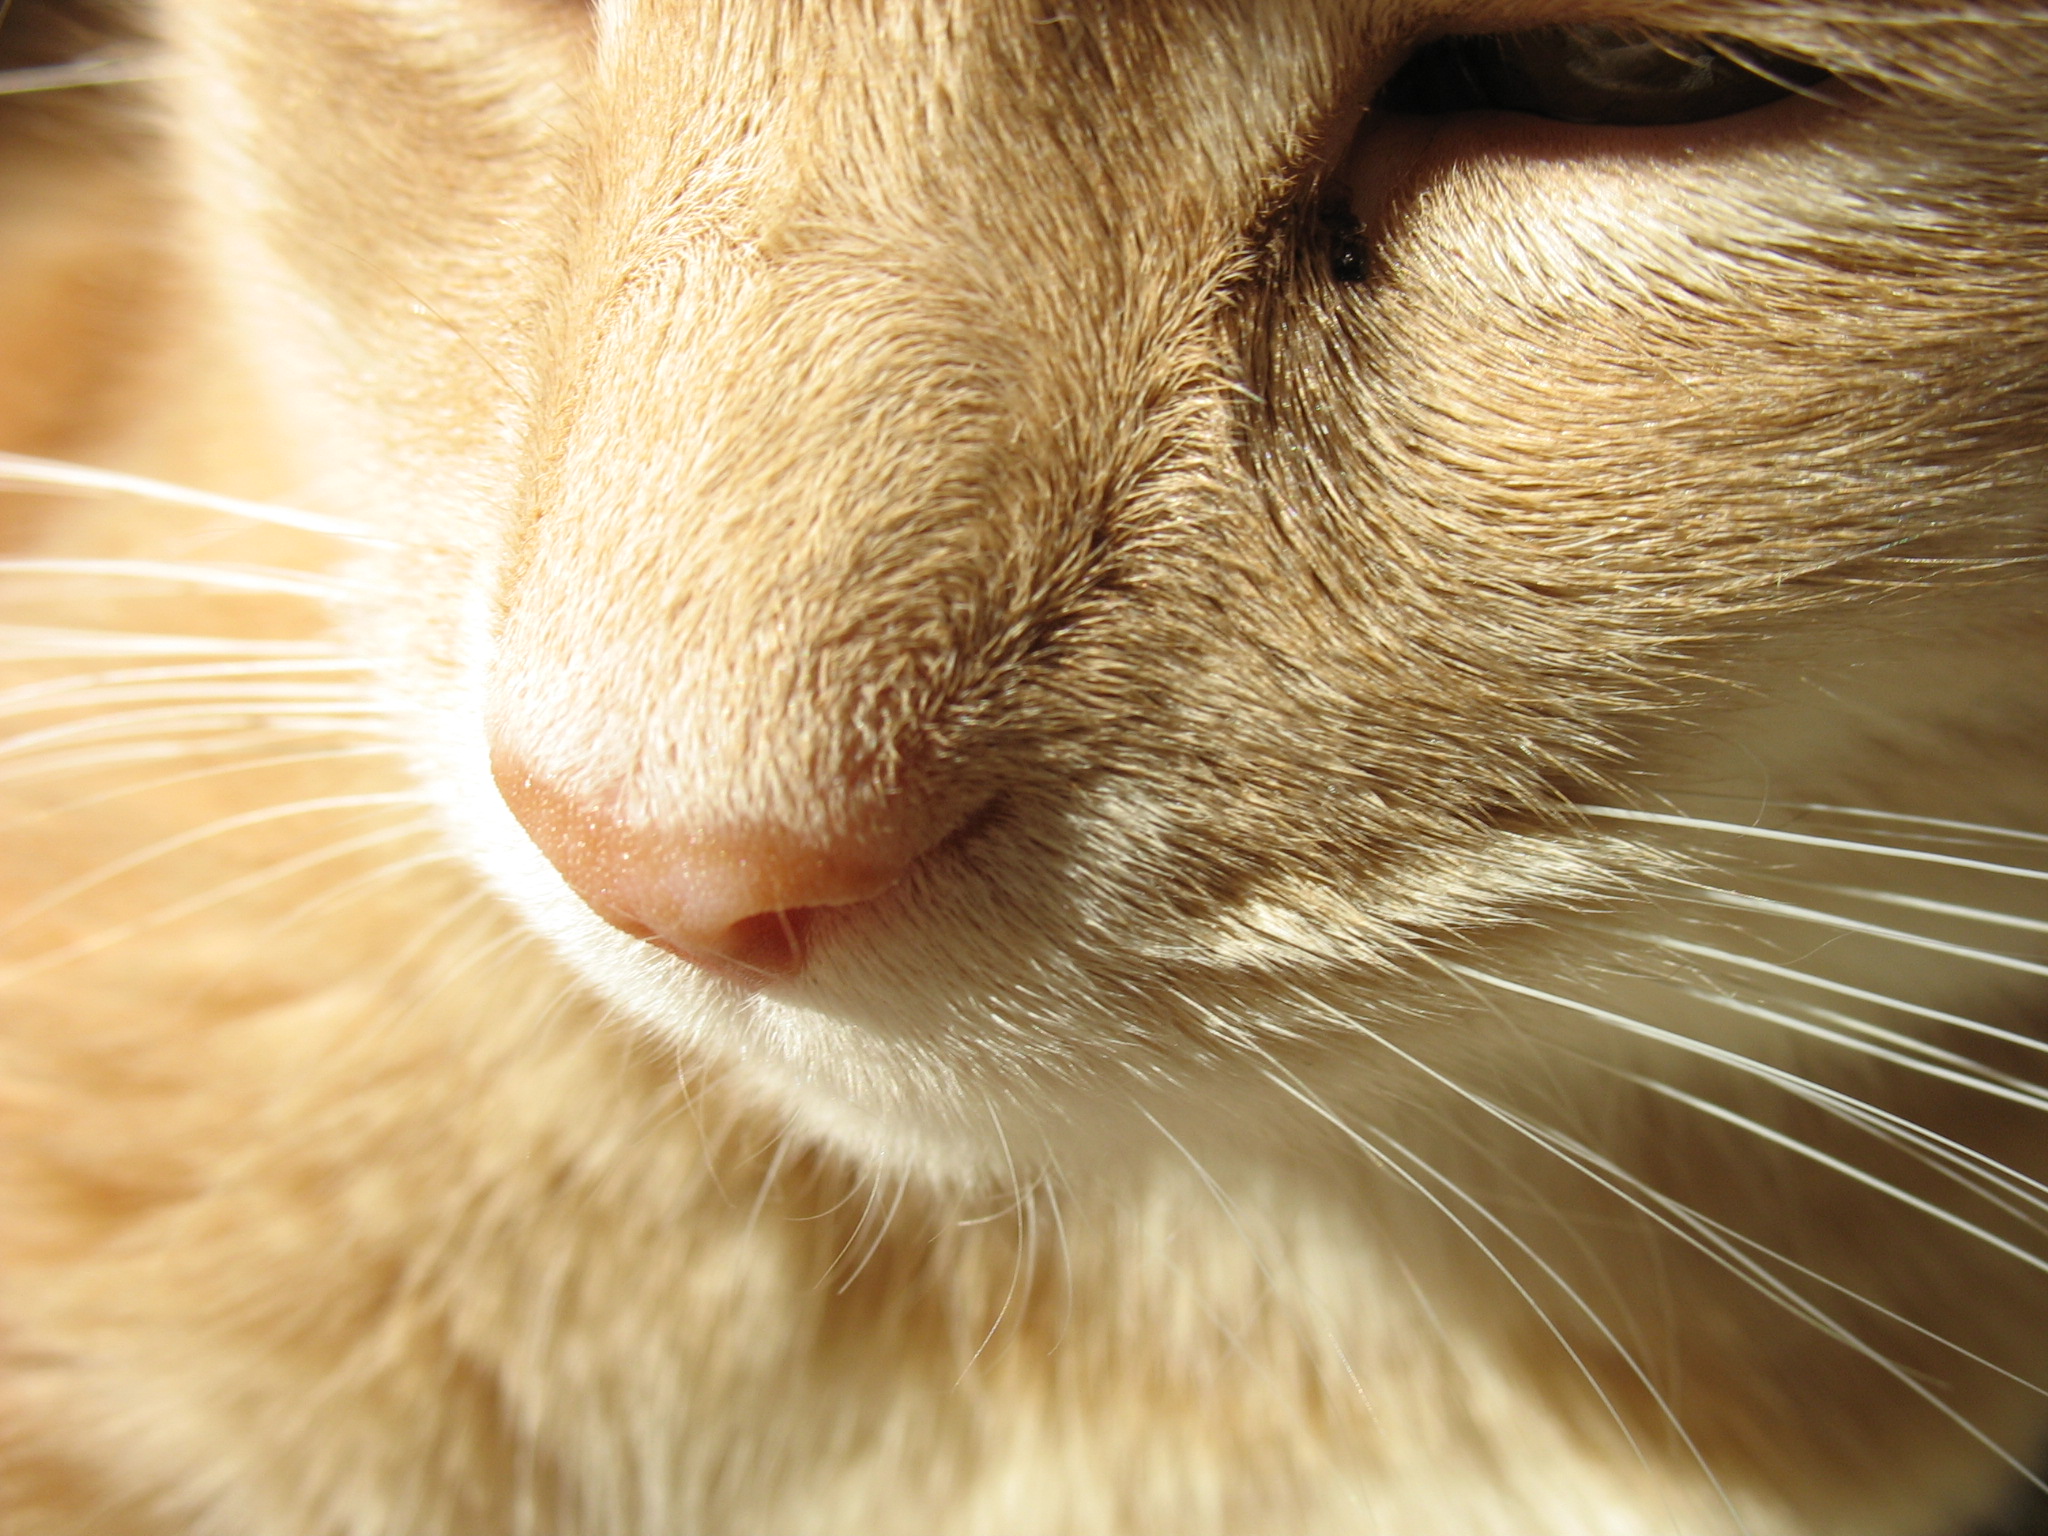 a close up of the face of an orange cat